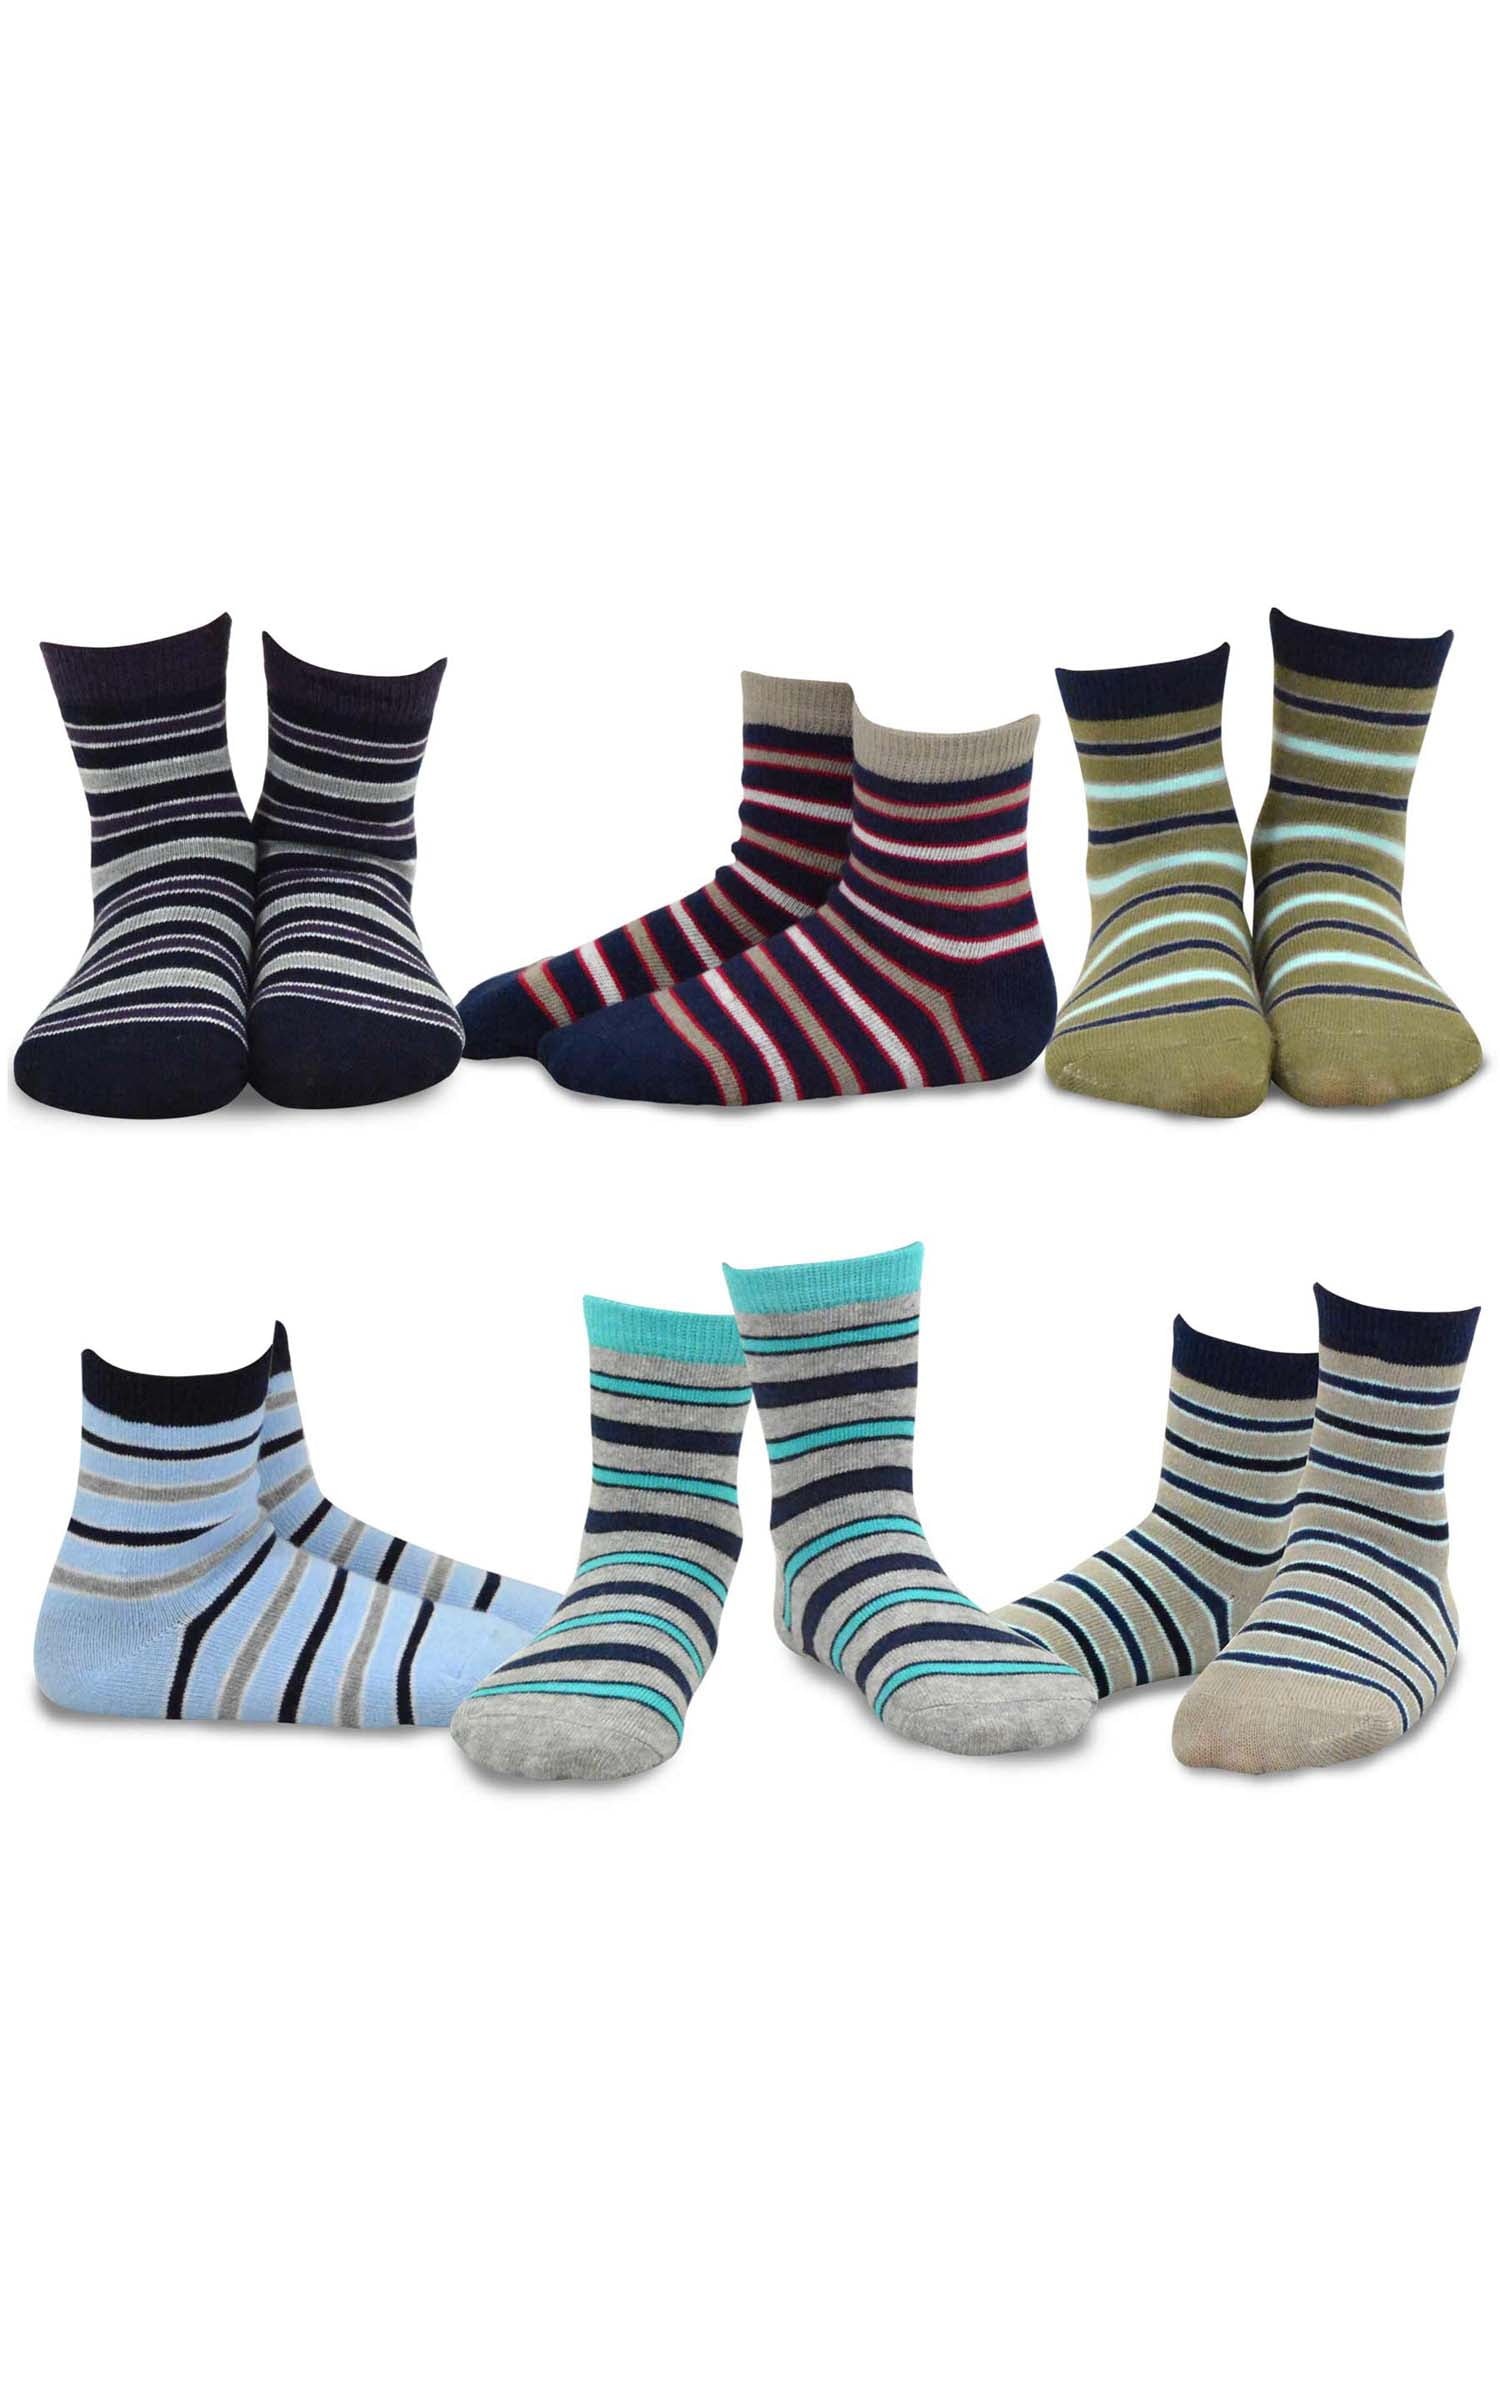 Details about   TeeHee Kids Boys Basic Stripe Crew Socks 6 Pair Pack Rugby Striped Soft Warm 